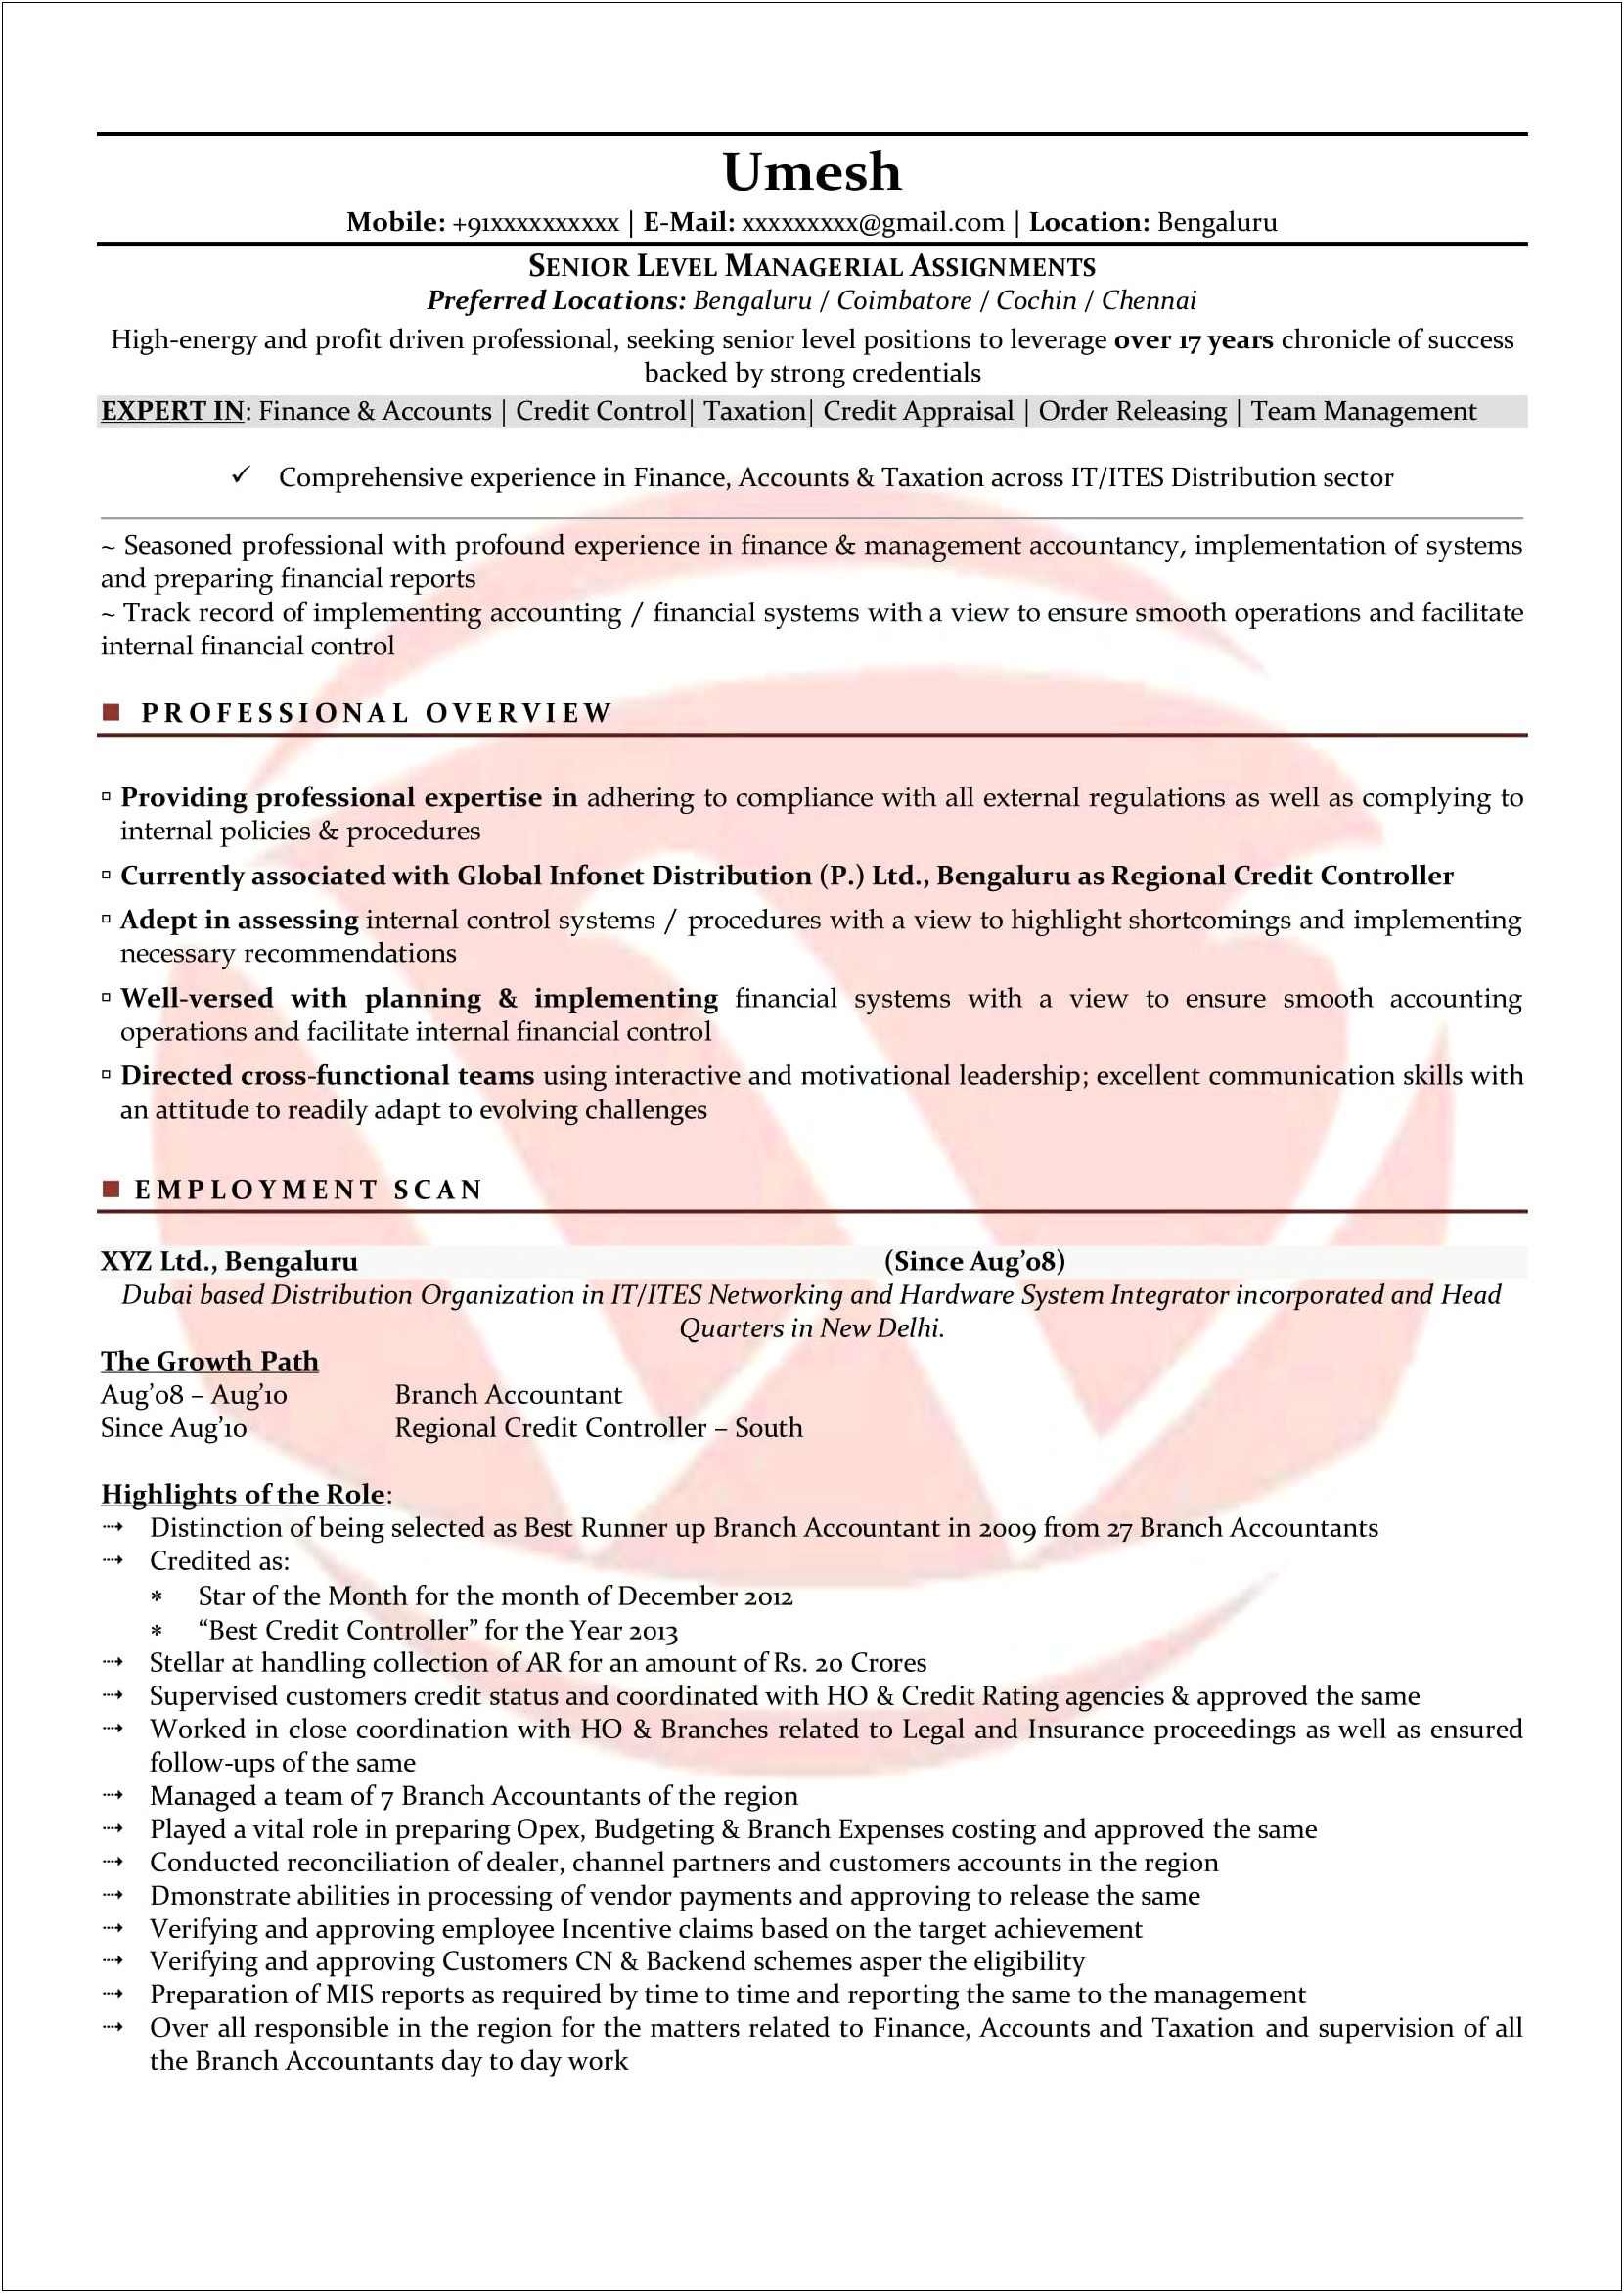 Resume Samples For Experienced Professionals India